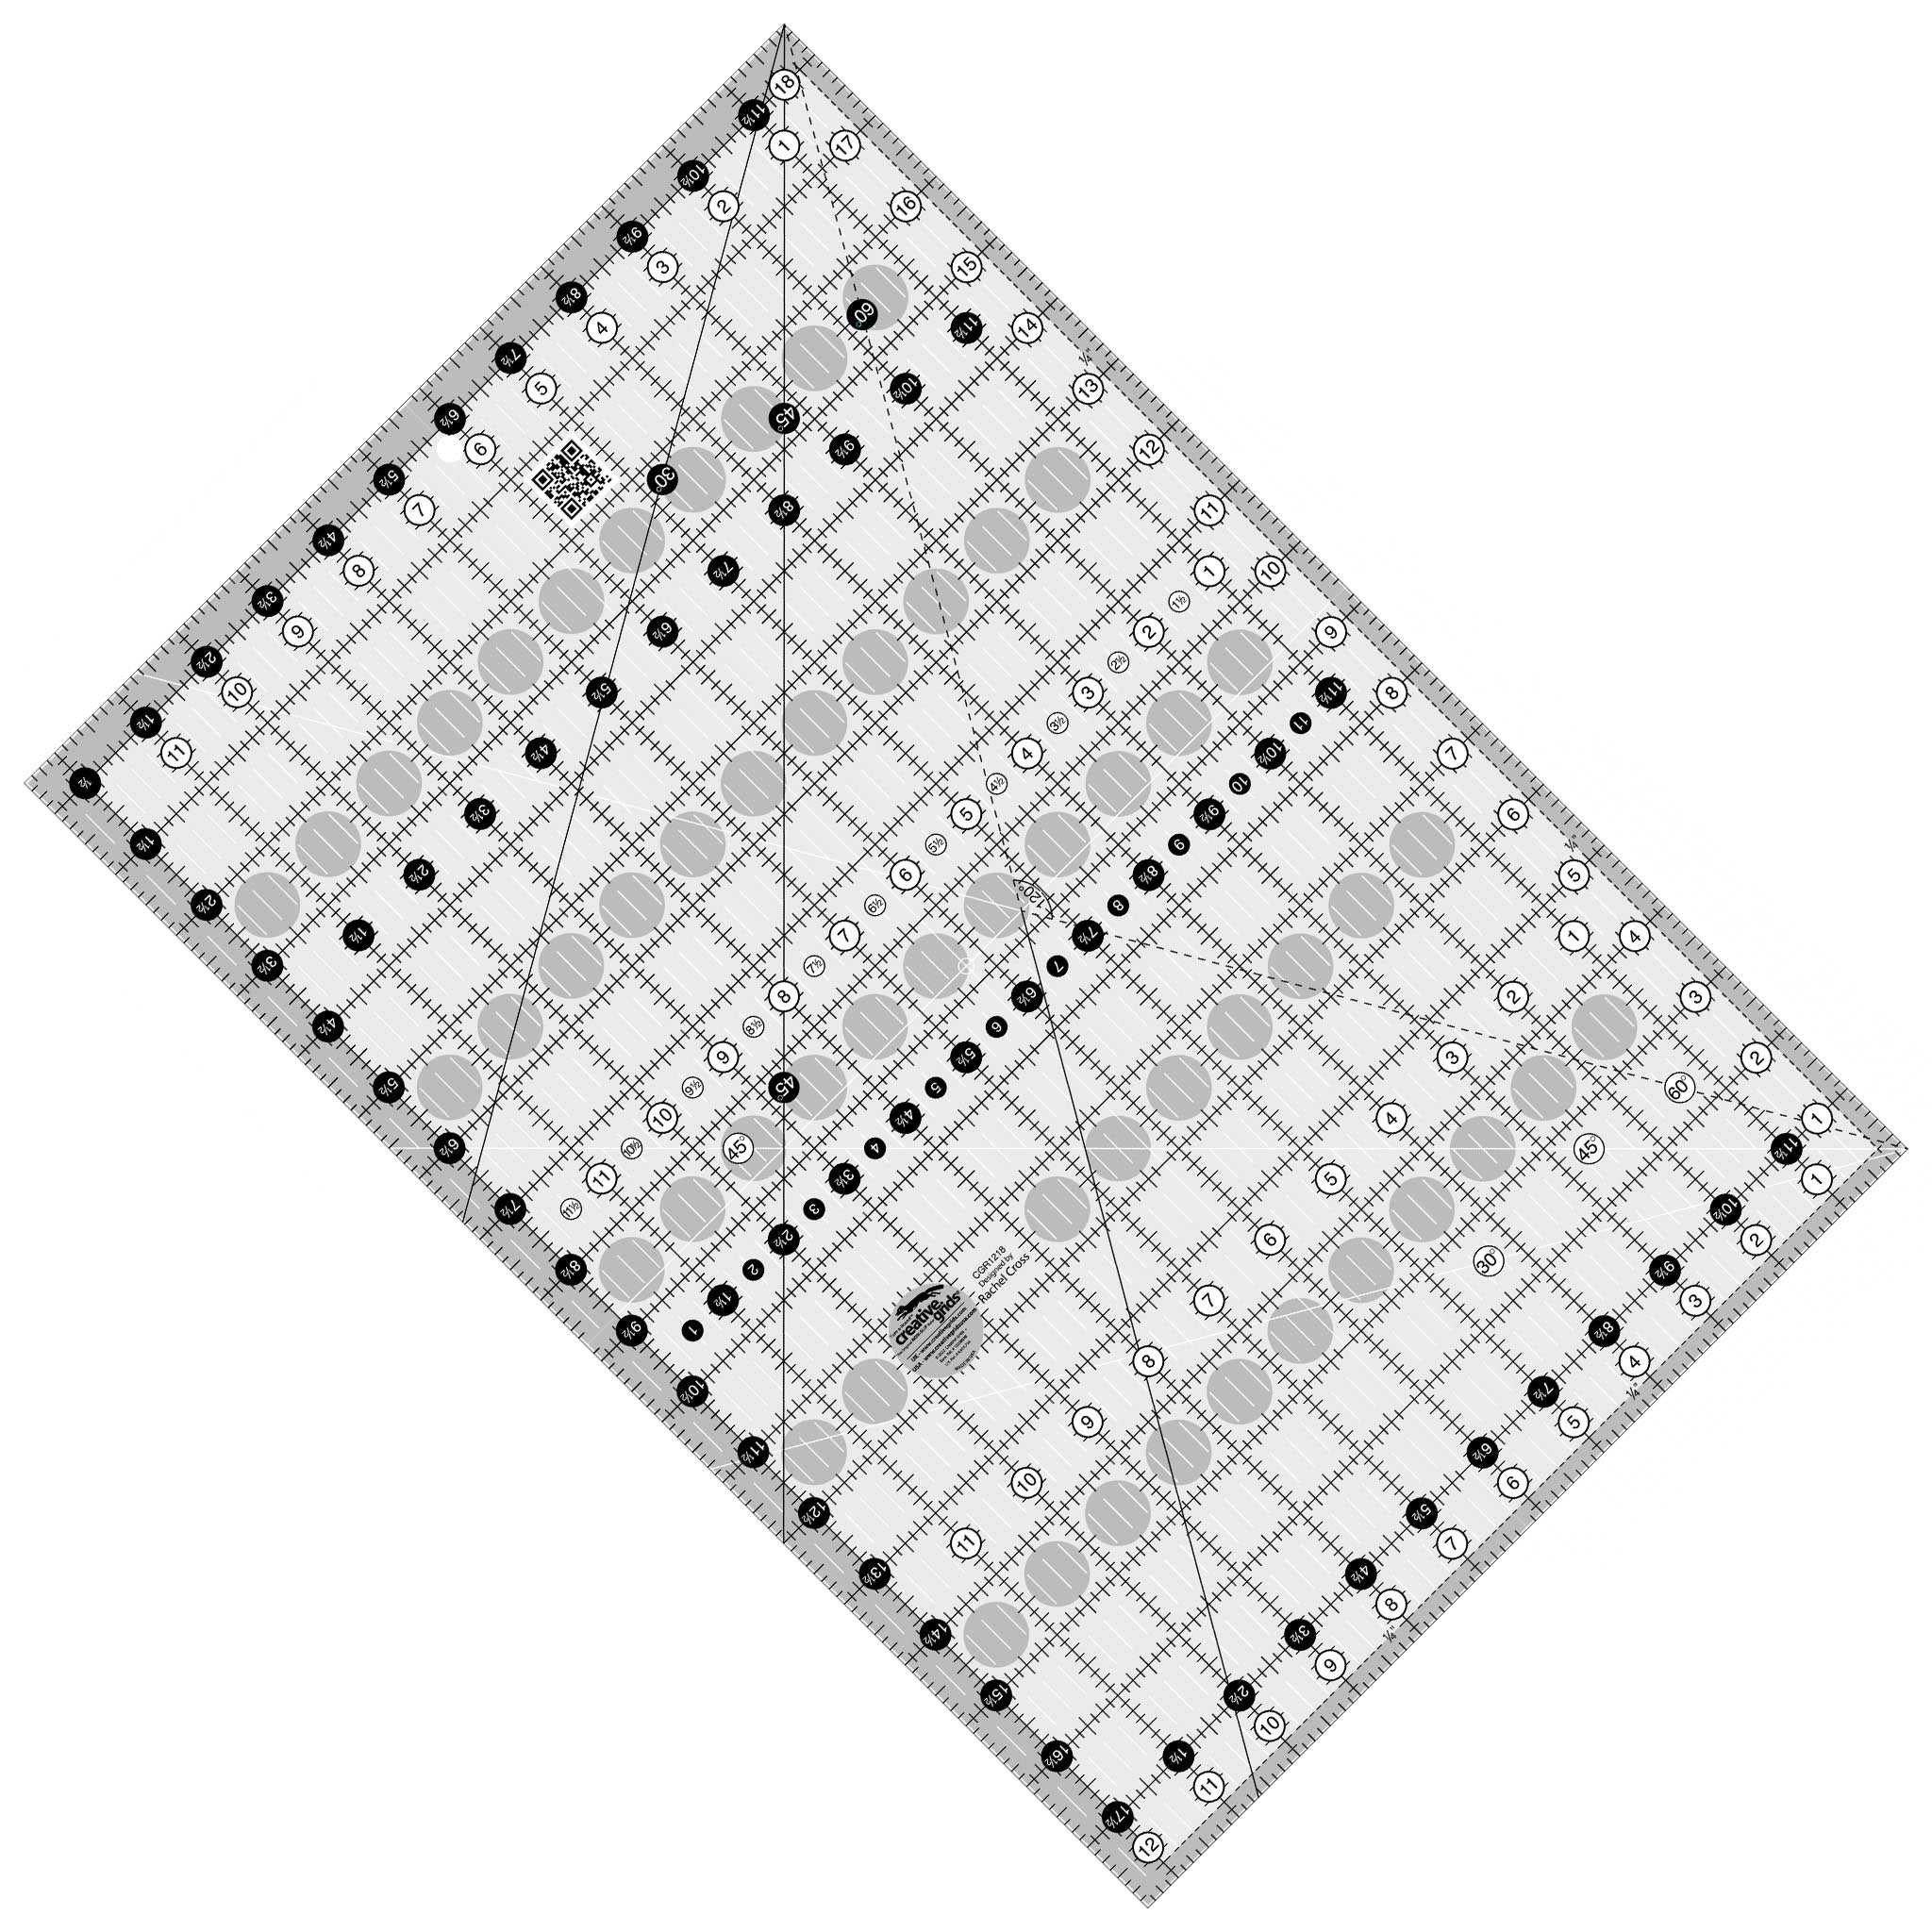 Creative Grids Quilting Rulers - 212